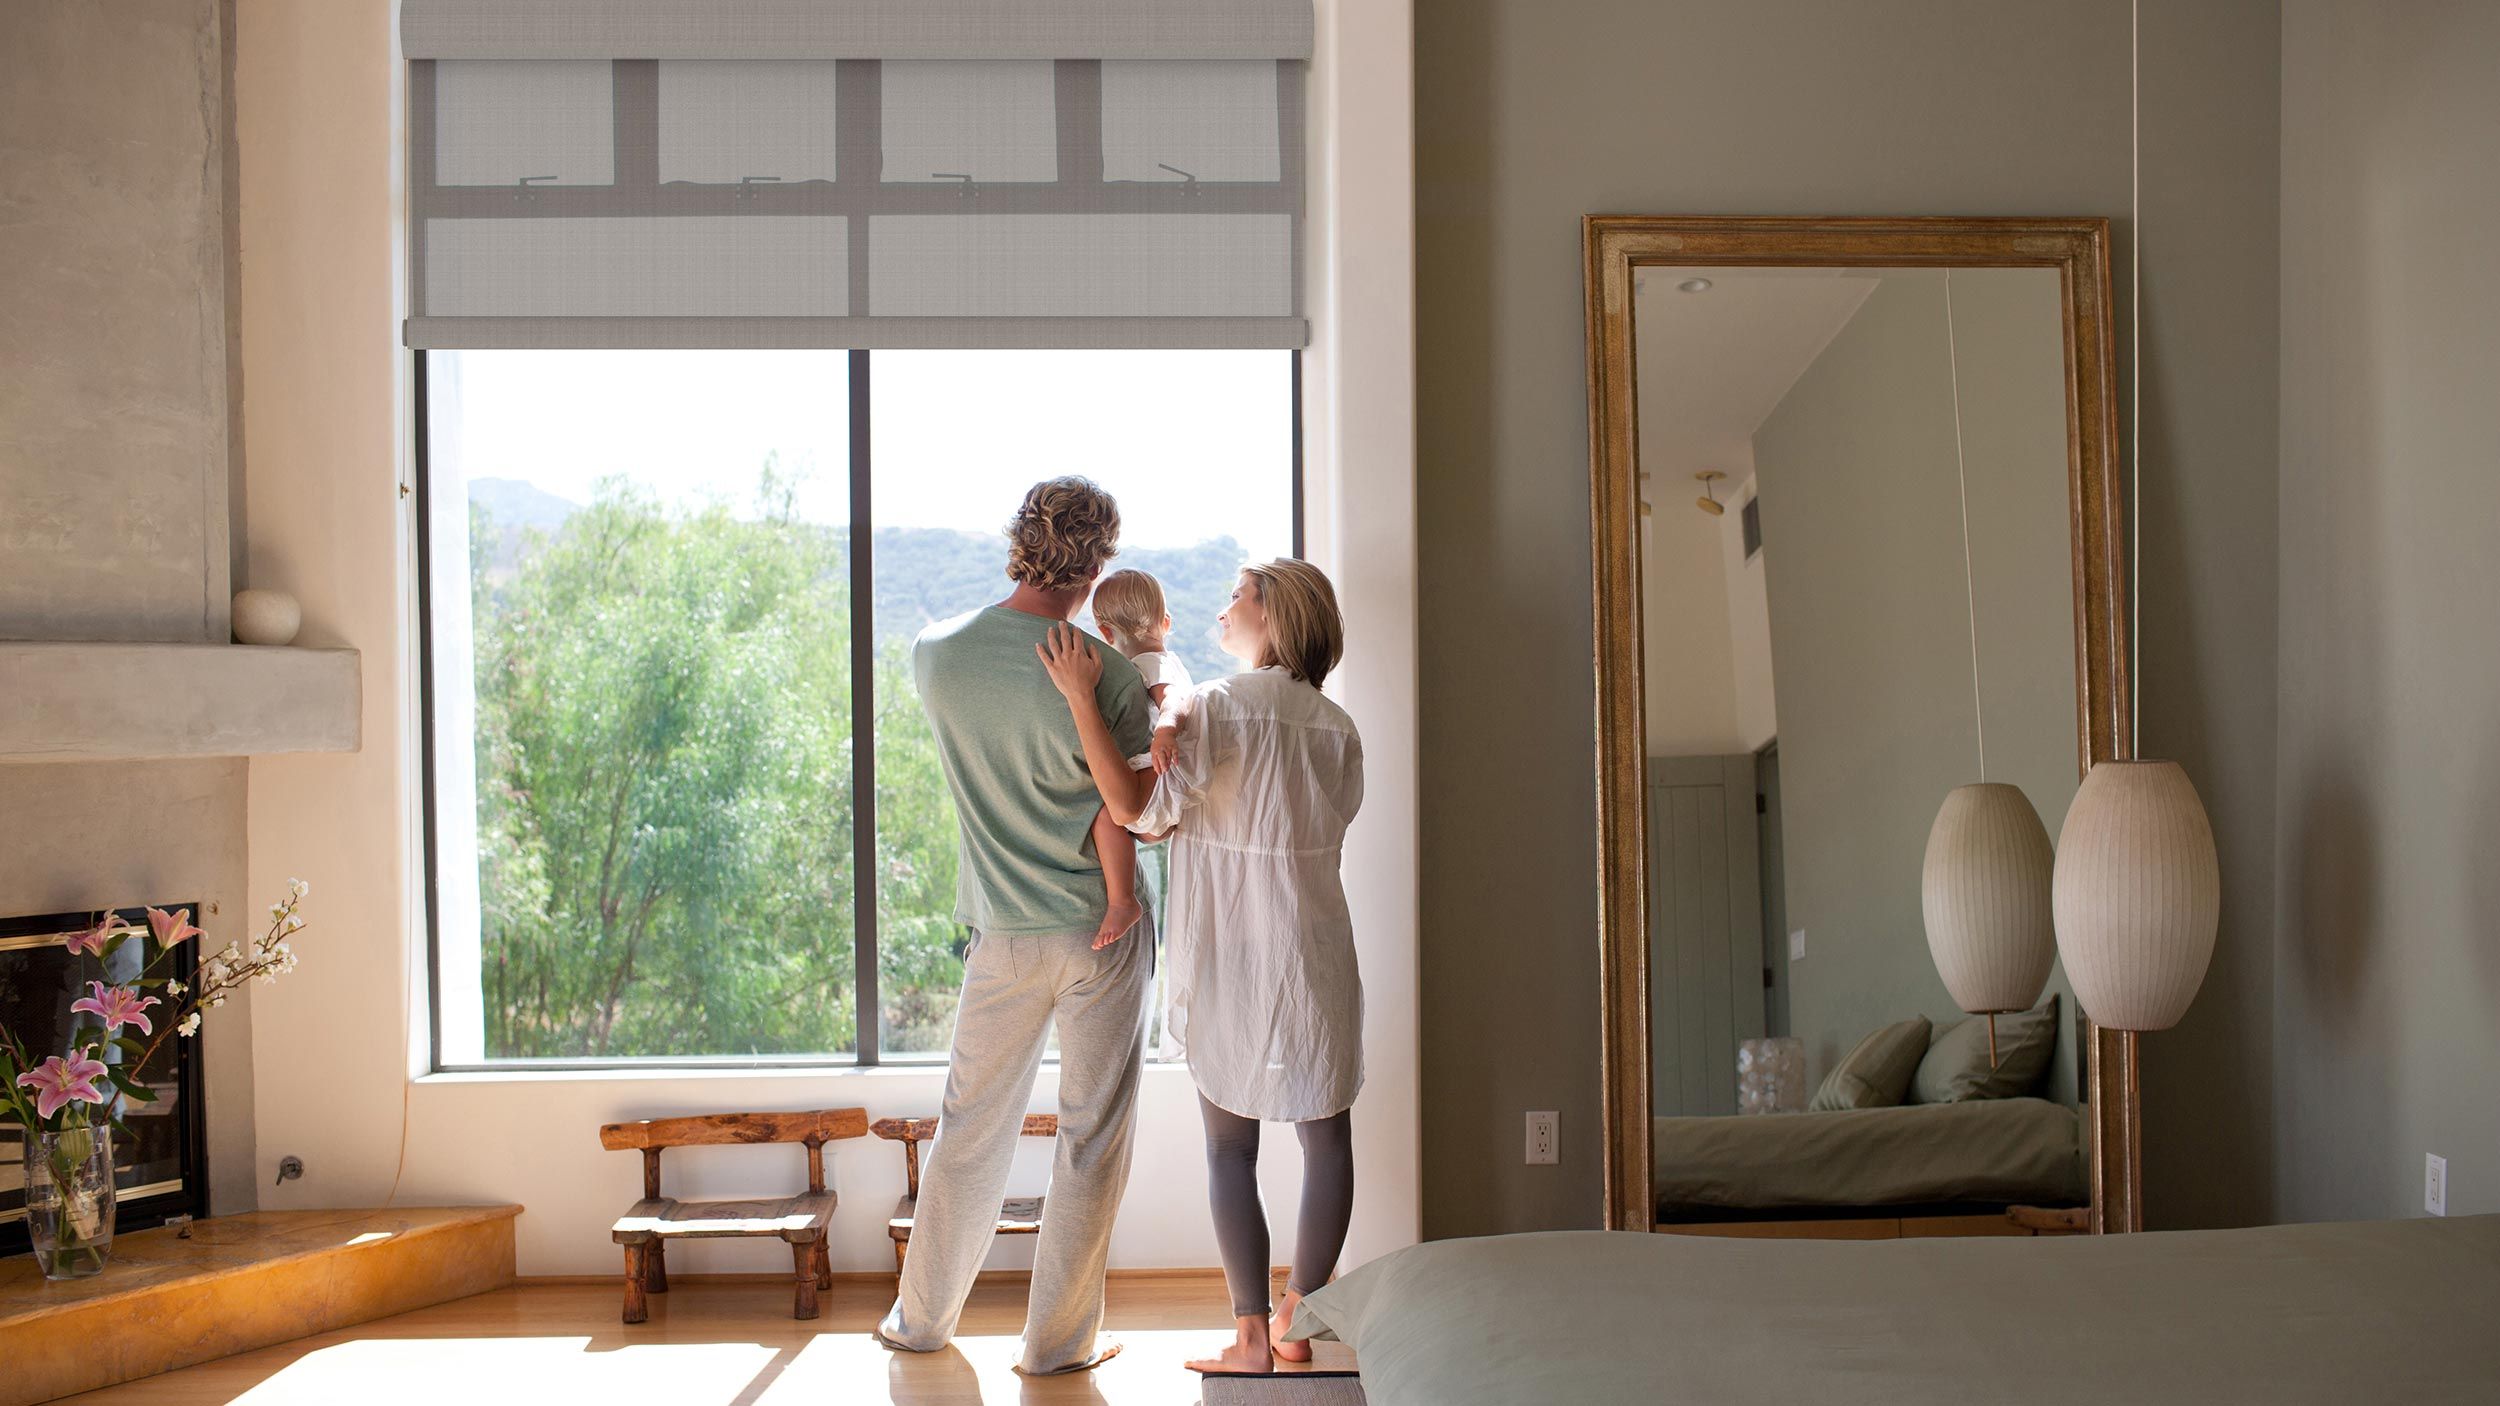 Couple with a baby in a bedroom with Crestron roller shades